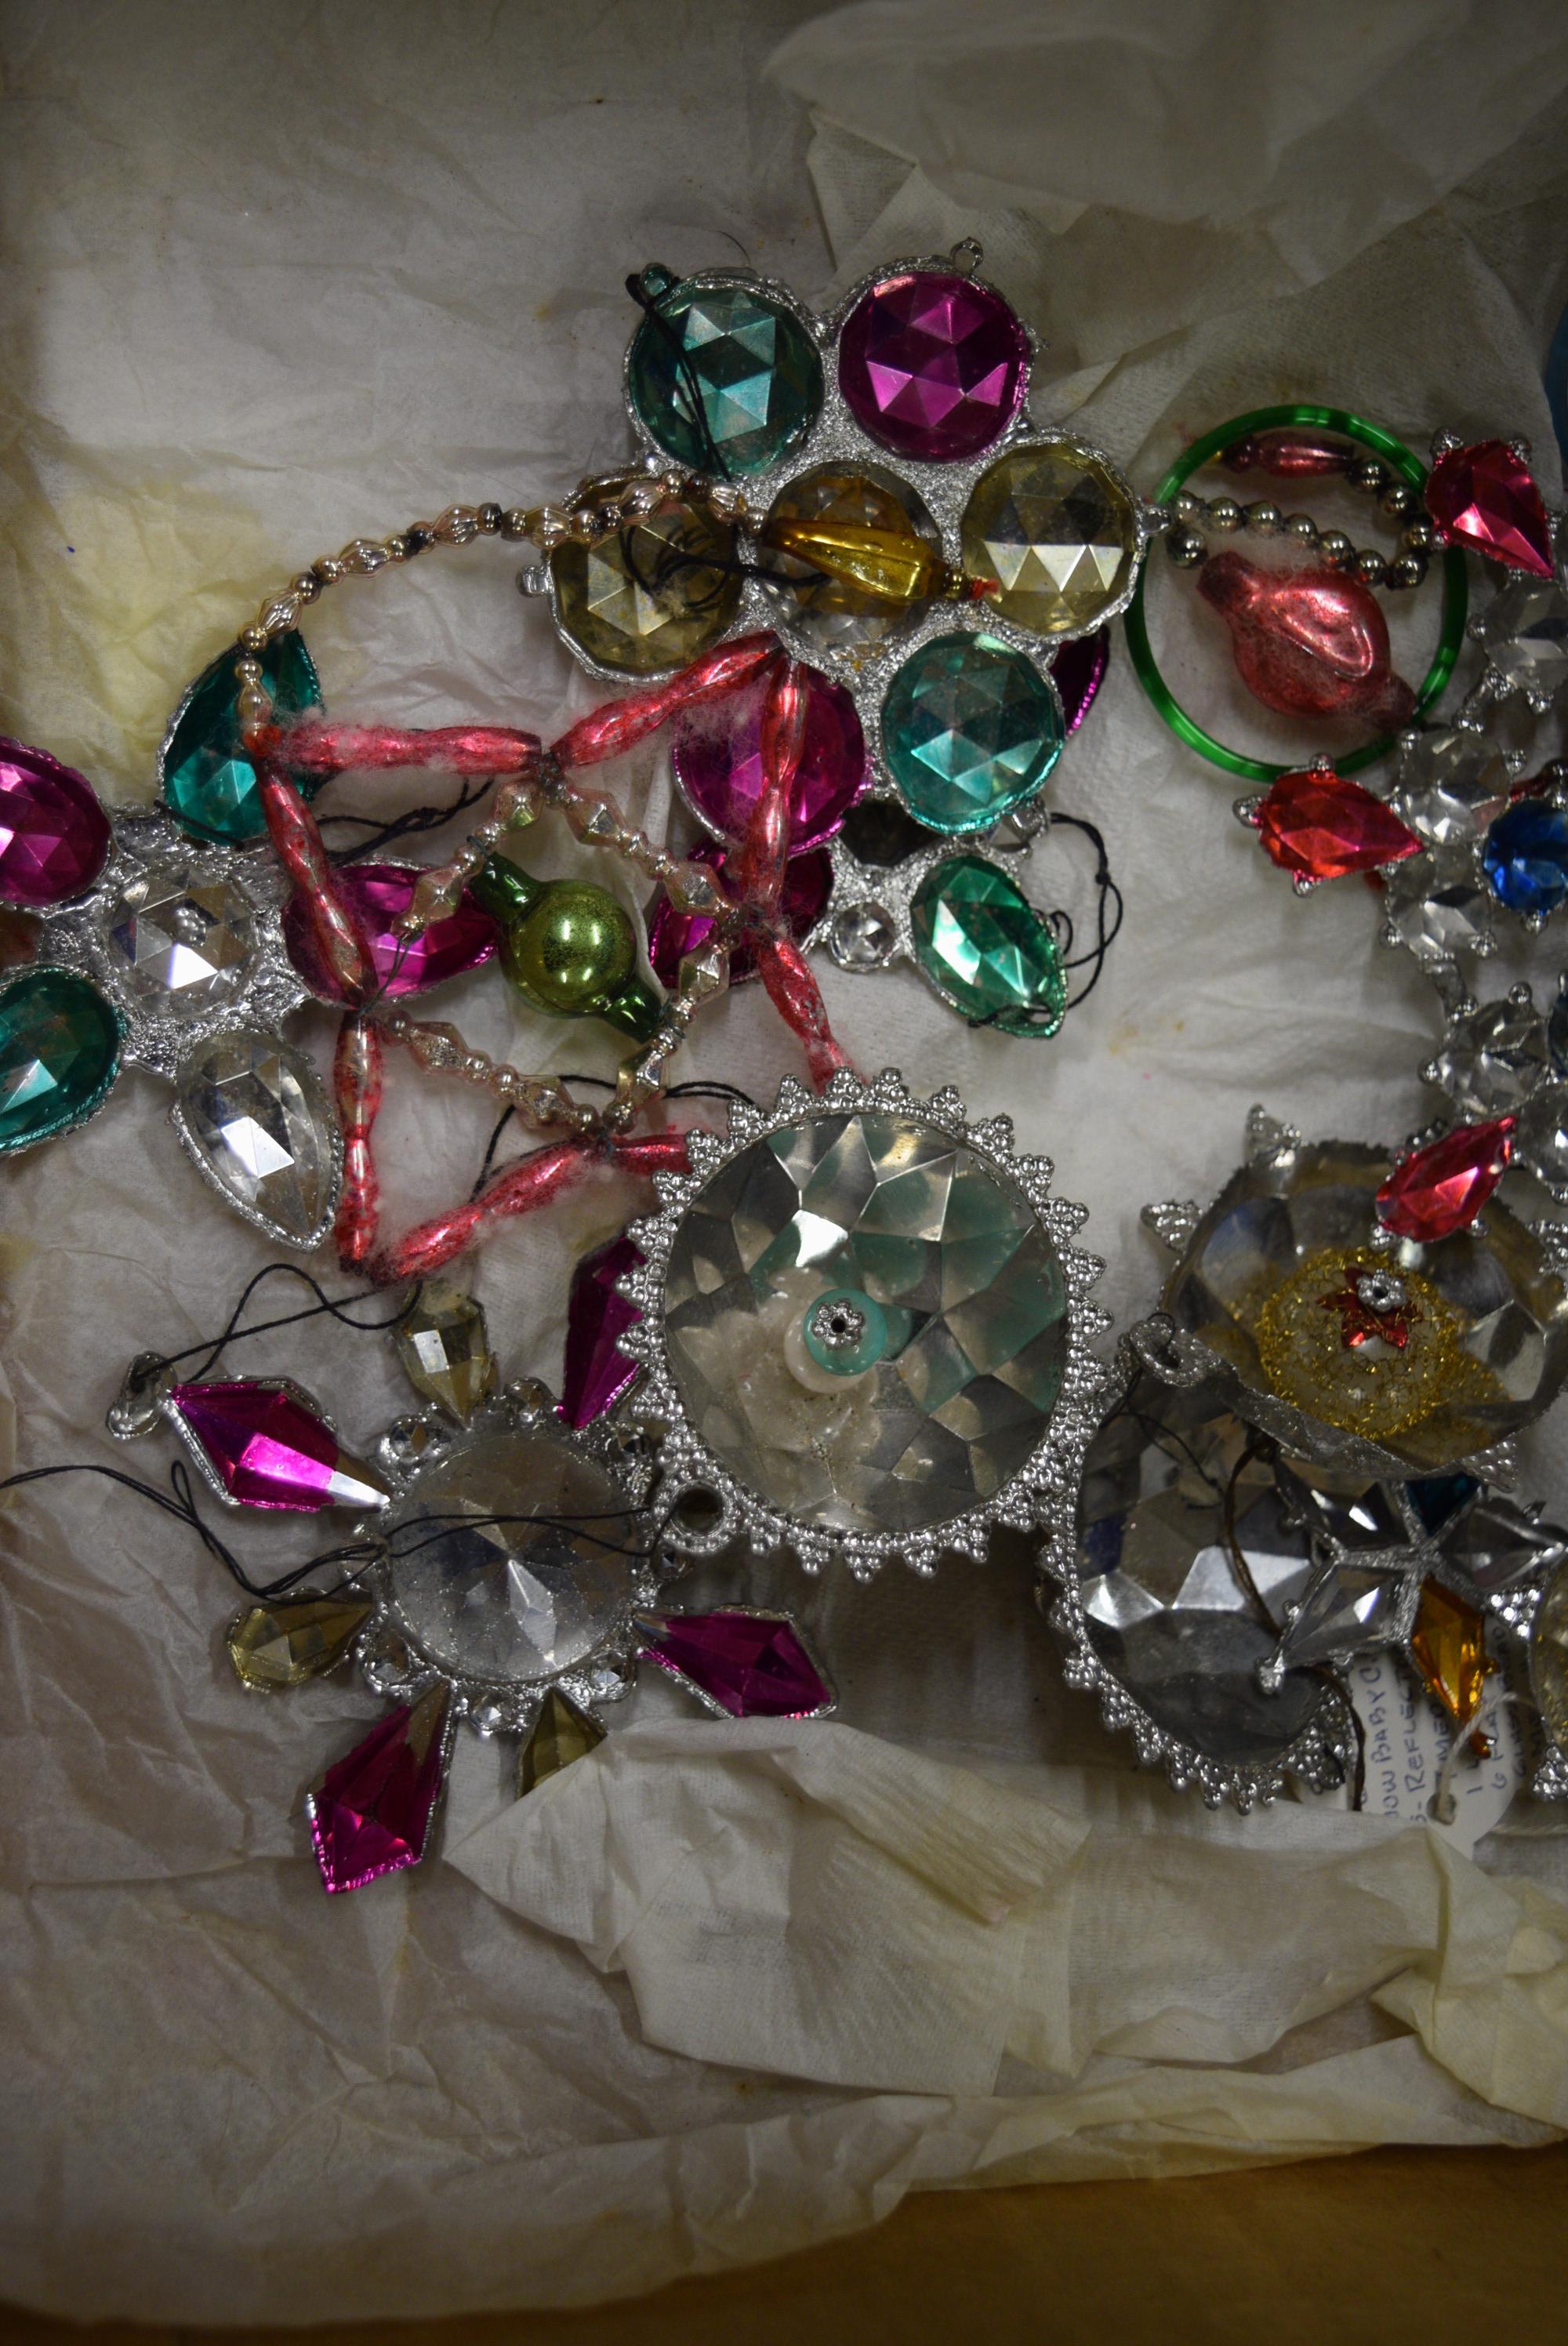 GIANT LOT OF EXTREME VINTAGE CHRISTMAS ORNAMENTS!